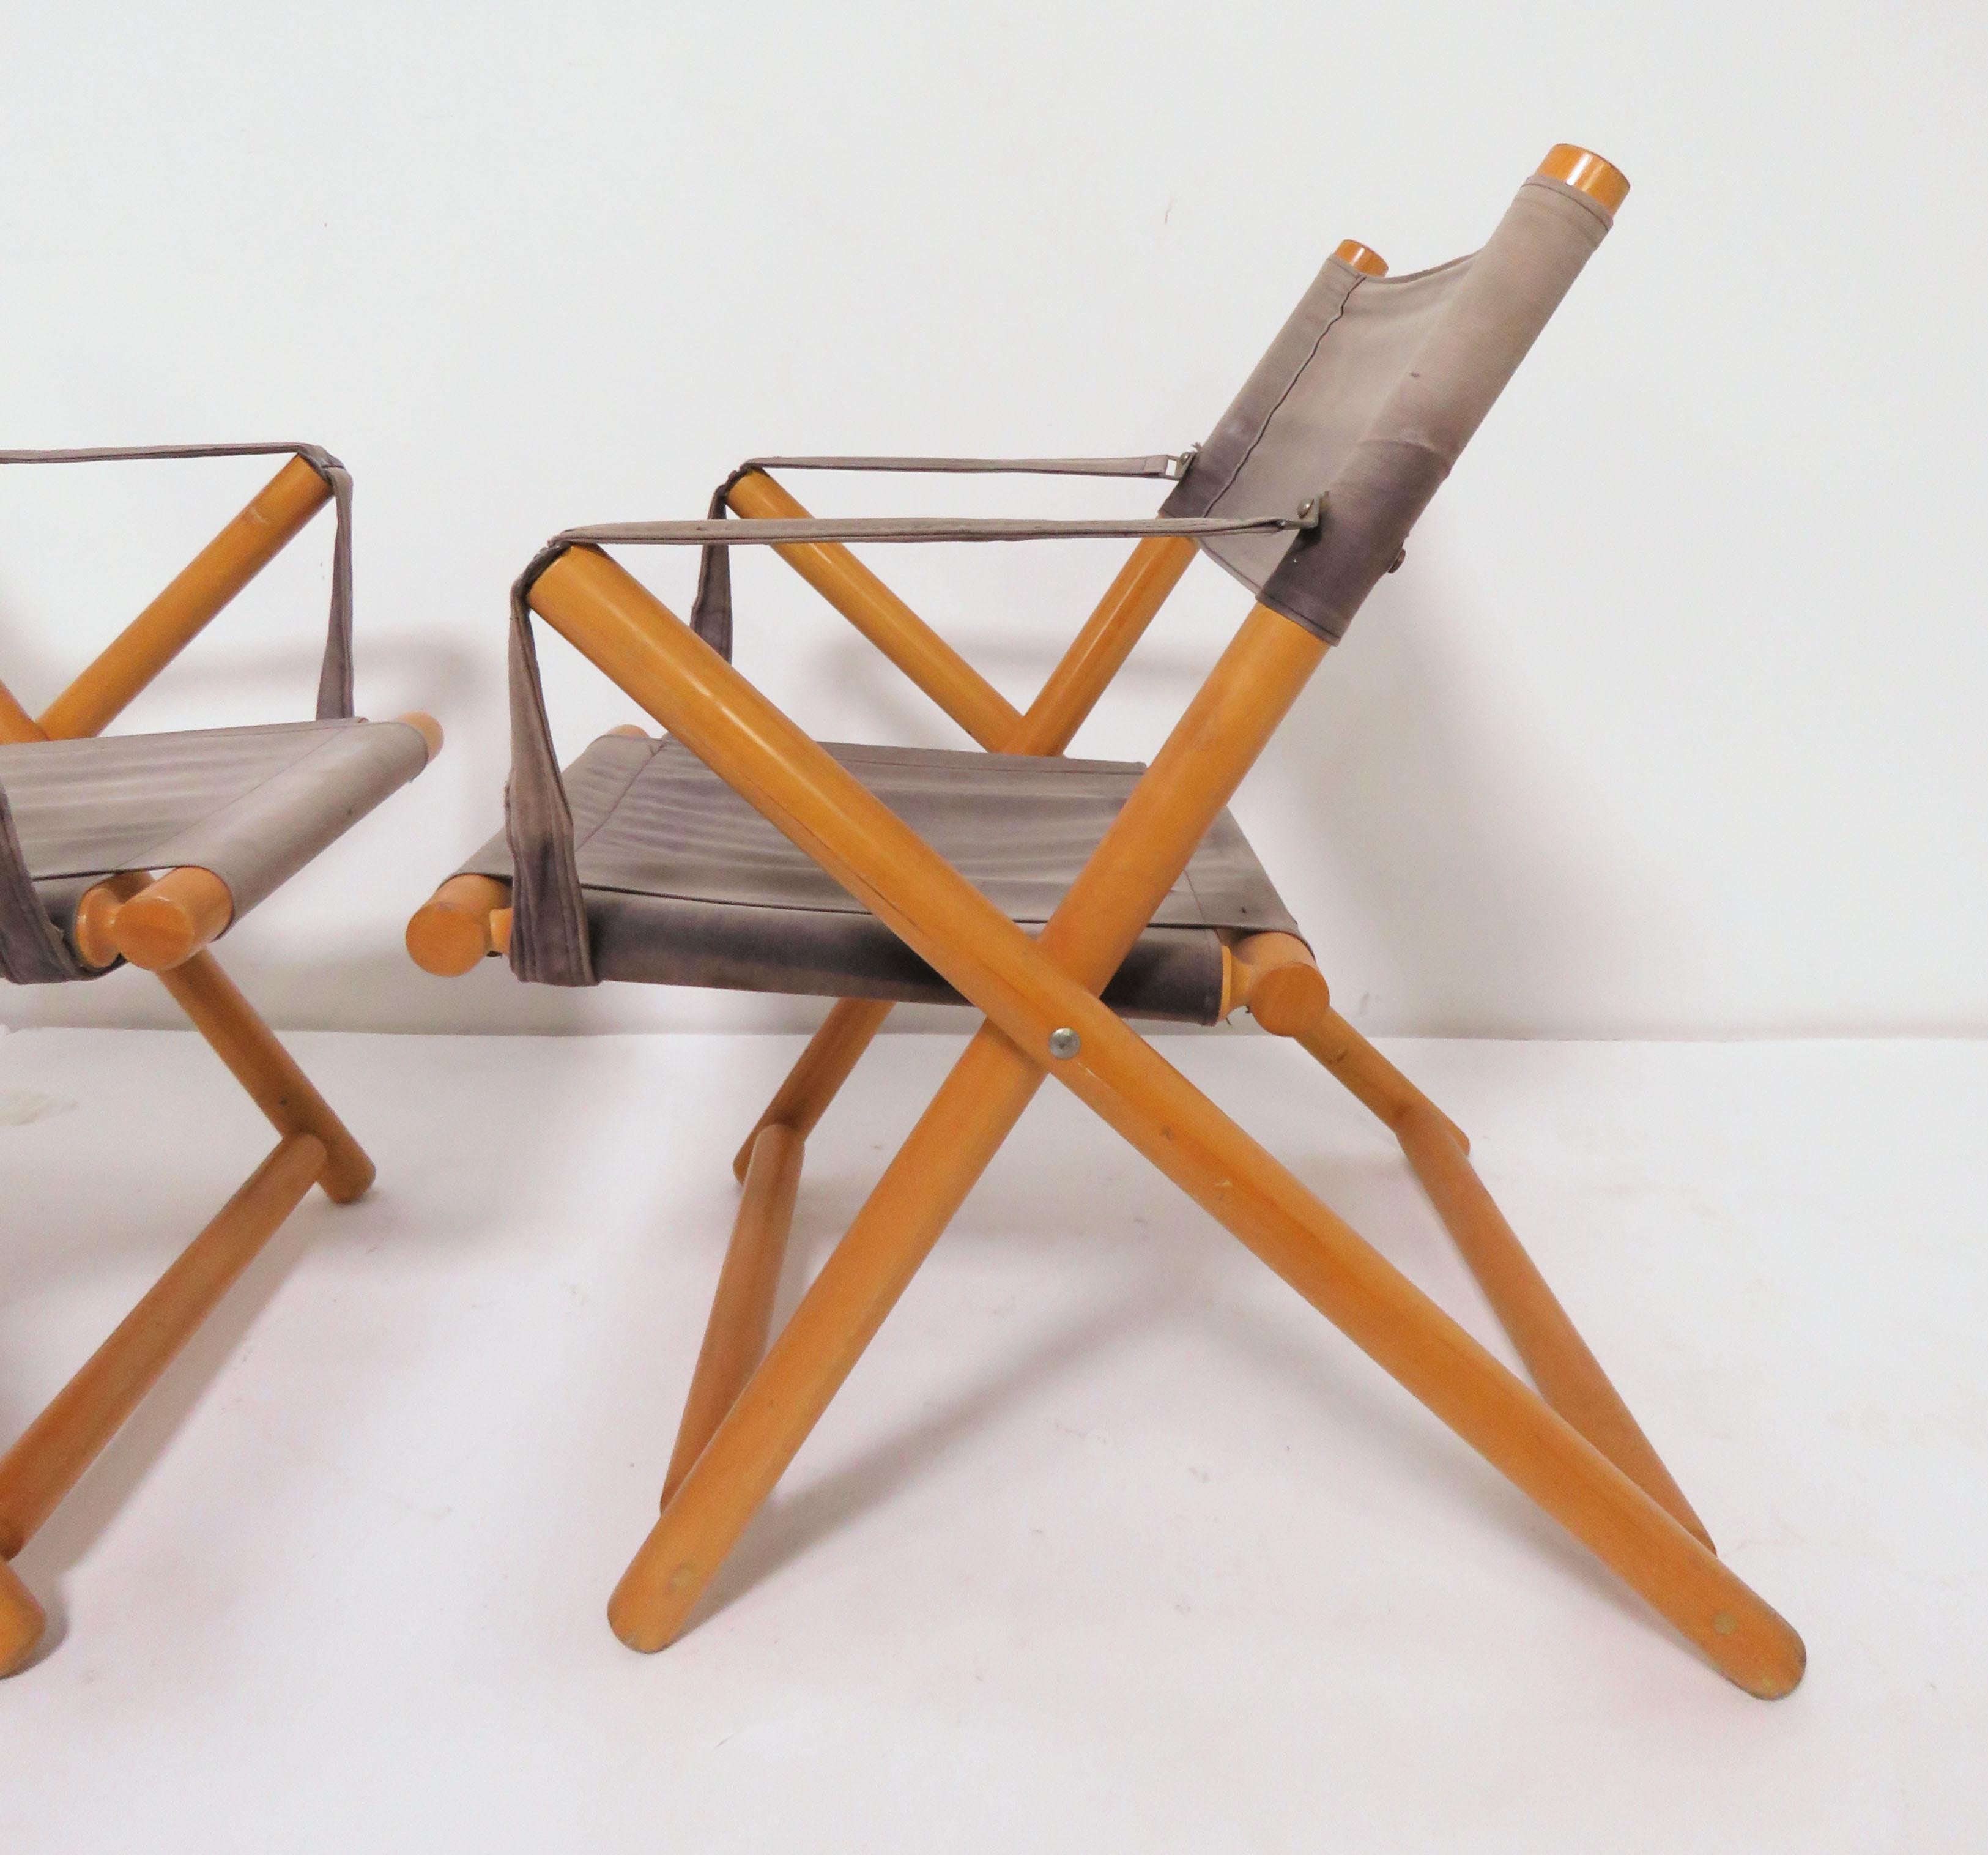 An elegant pair of folding safari chairs with original canvas slings, made by the Gerdau Furniture Co. of Brazil in the early 1970s.